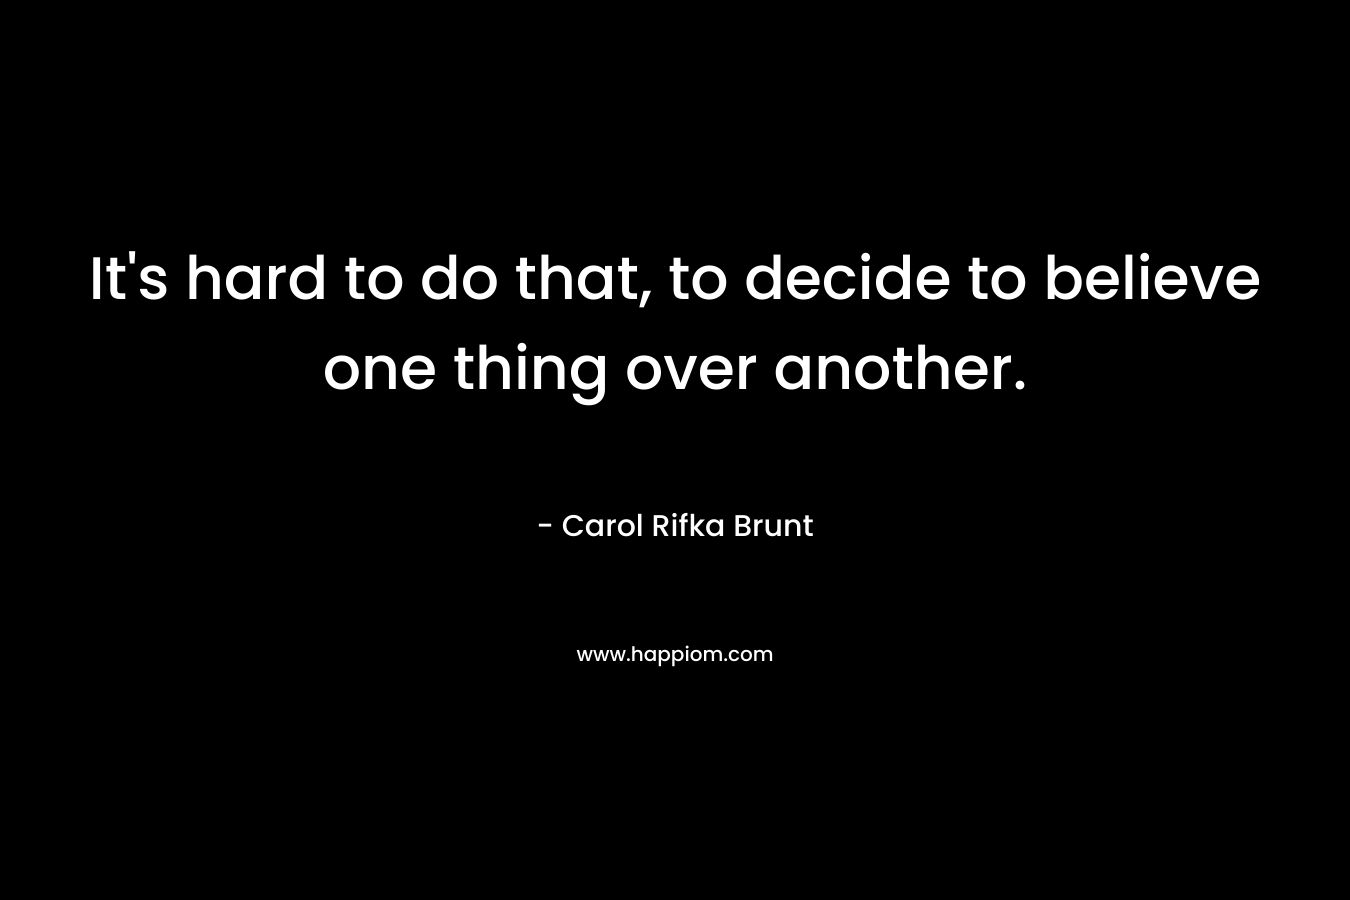 It’s hard to do that, to decide to believe one thing over another. – Carol Rifka Brunt